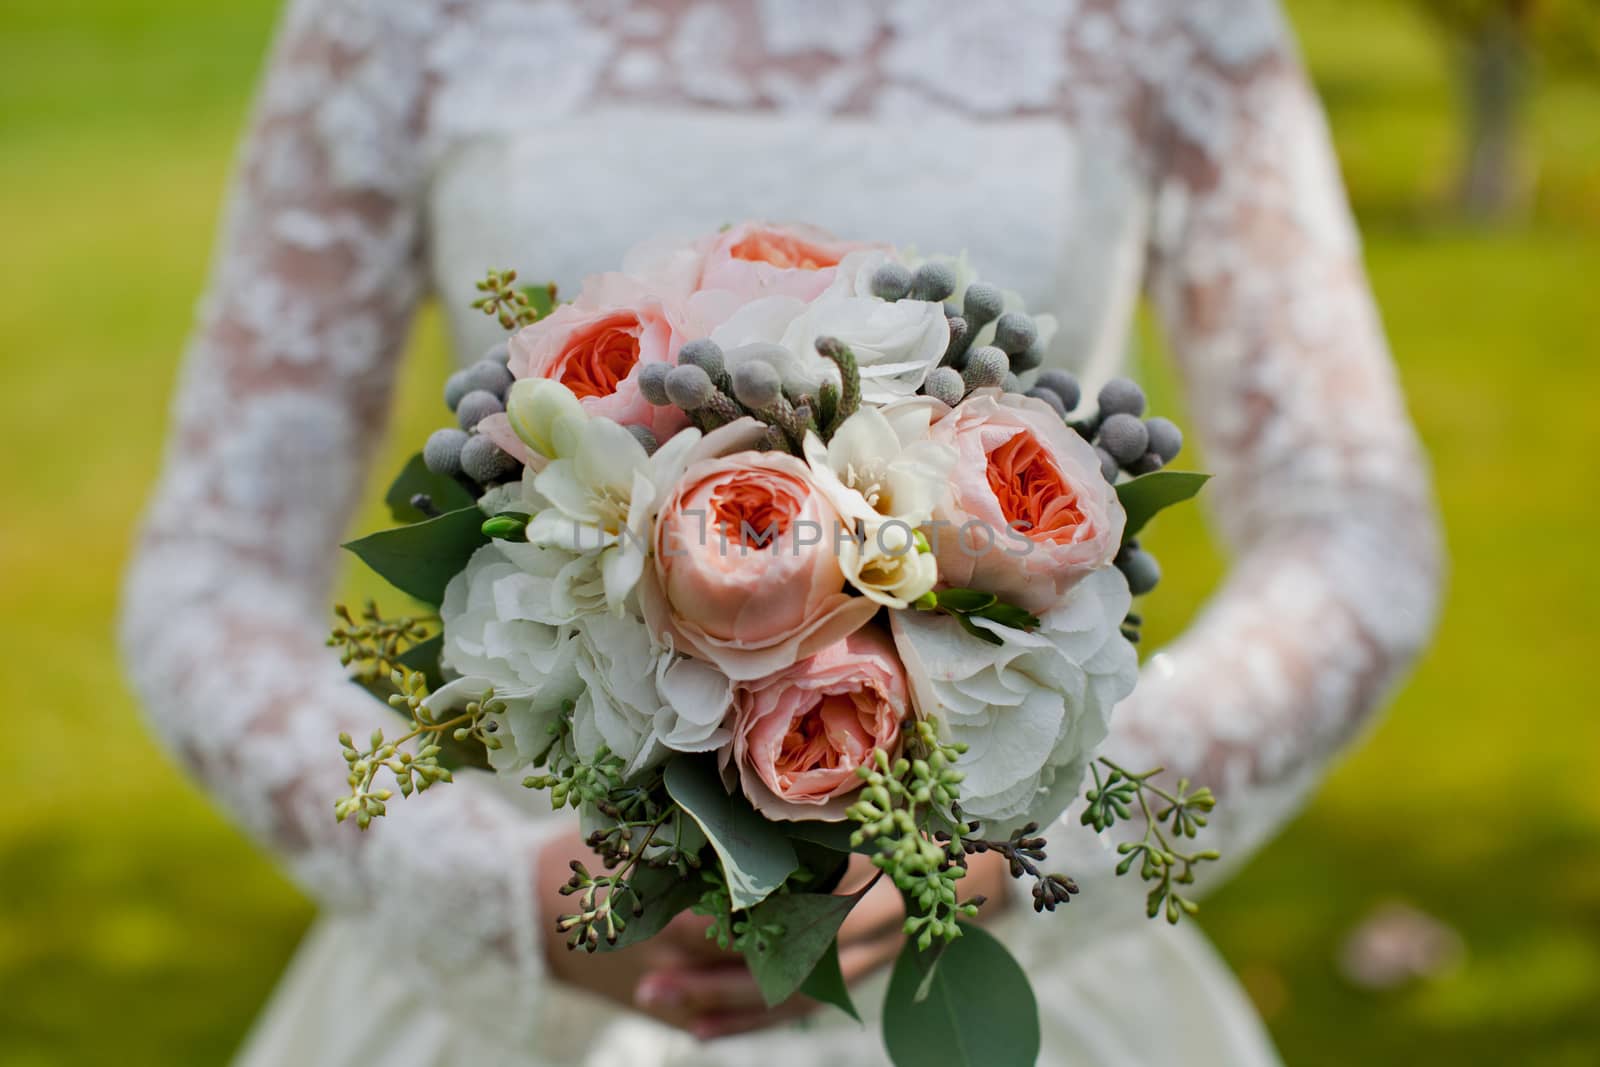 Wedding bouquet in hands of the bride by lanser314